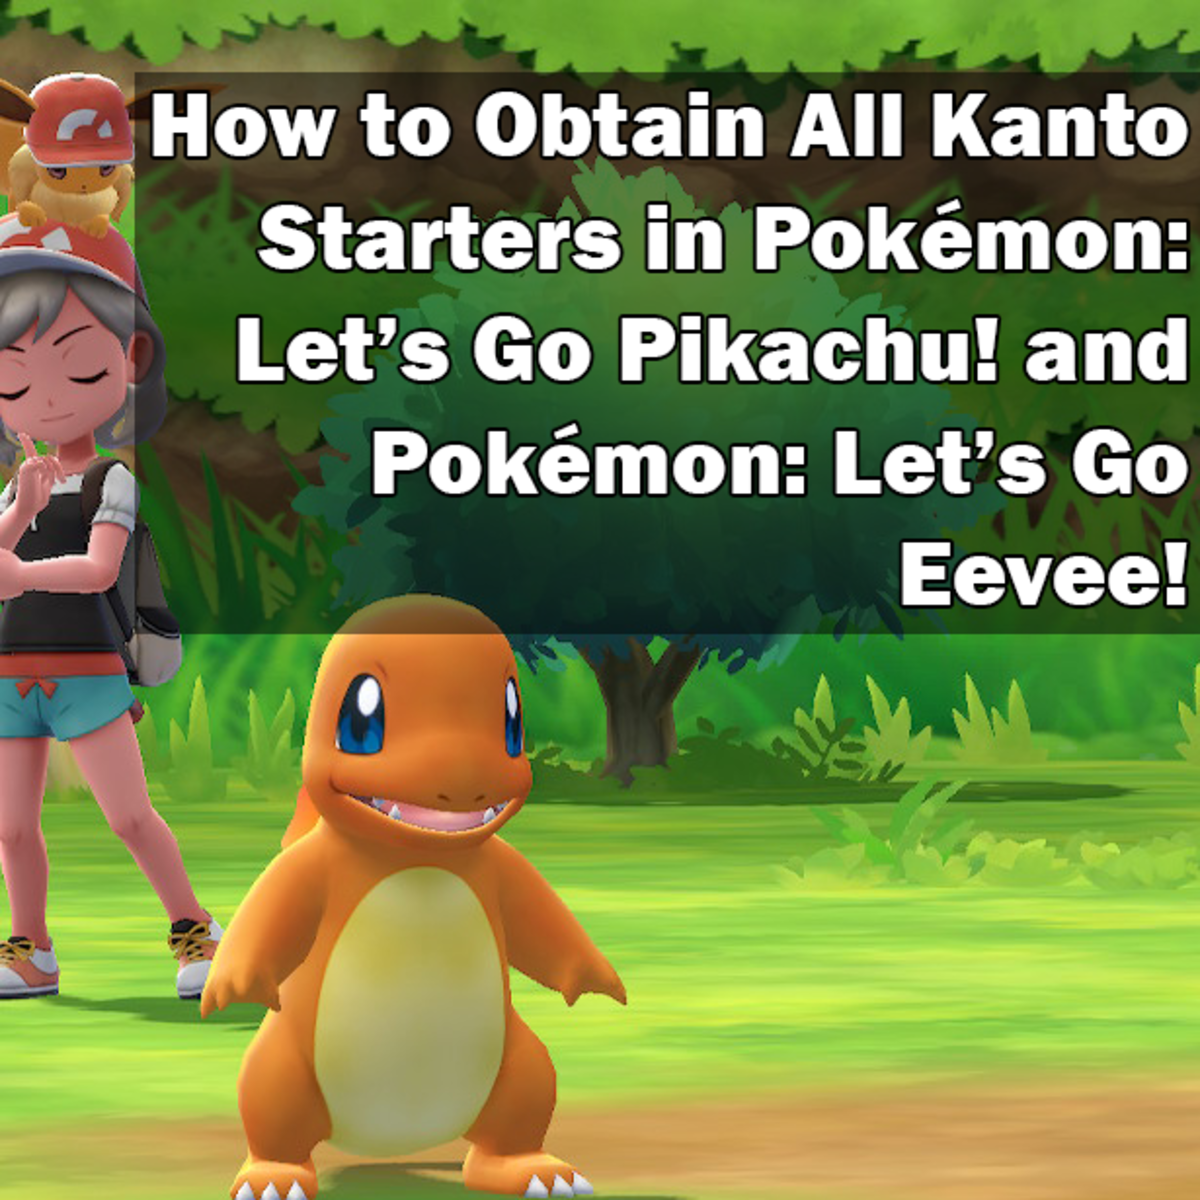 How to Obtain All Kanto Starters in Pokémon: Let’s Go Pikachu! and Pokémon: Let’s Go Eevee!